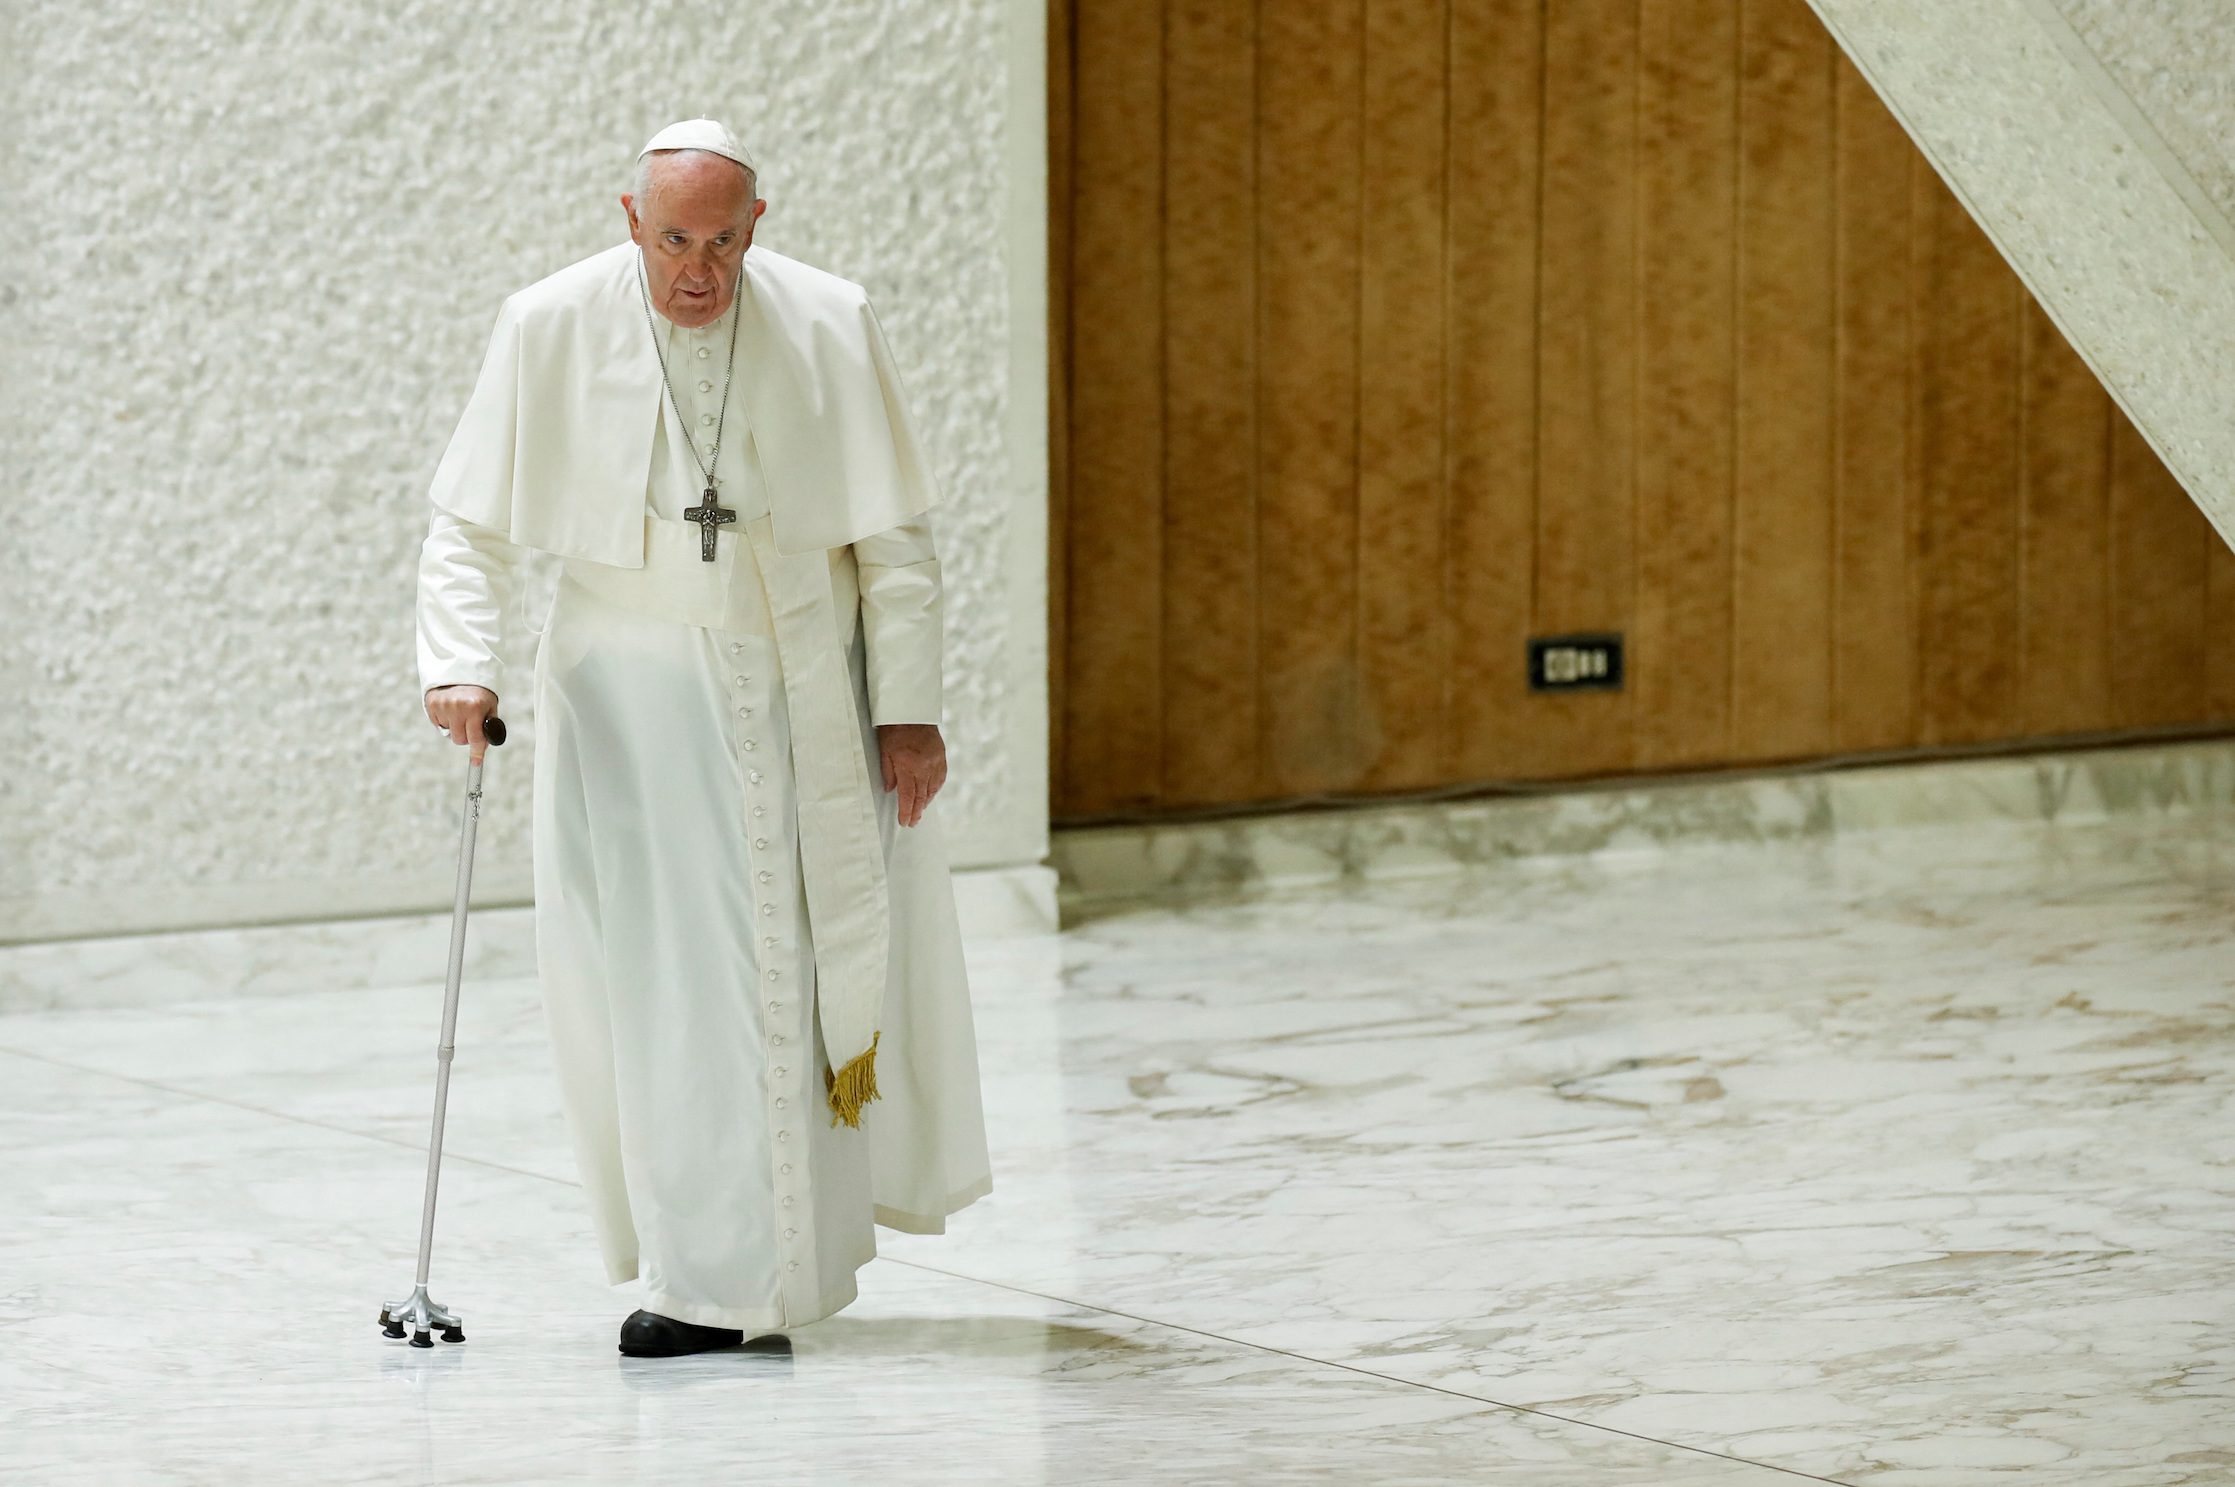 Pope Francis, slowing down as he ages, appoints personal medical assistant